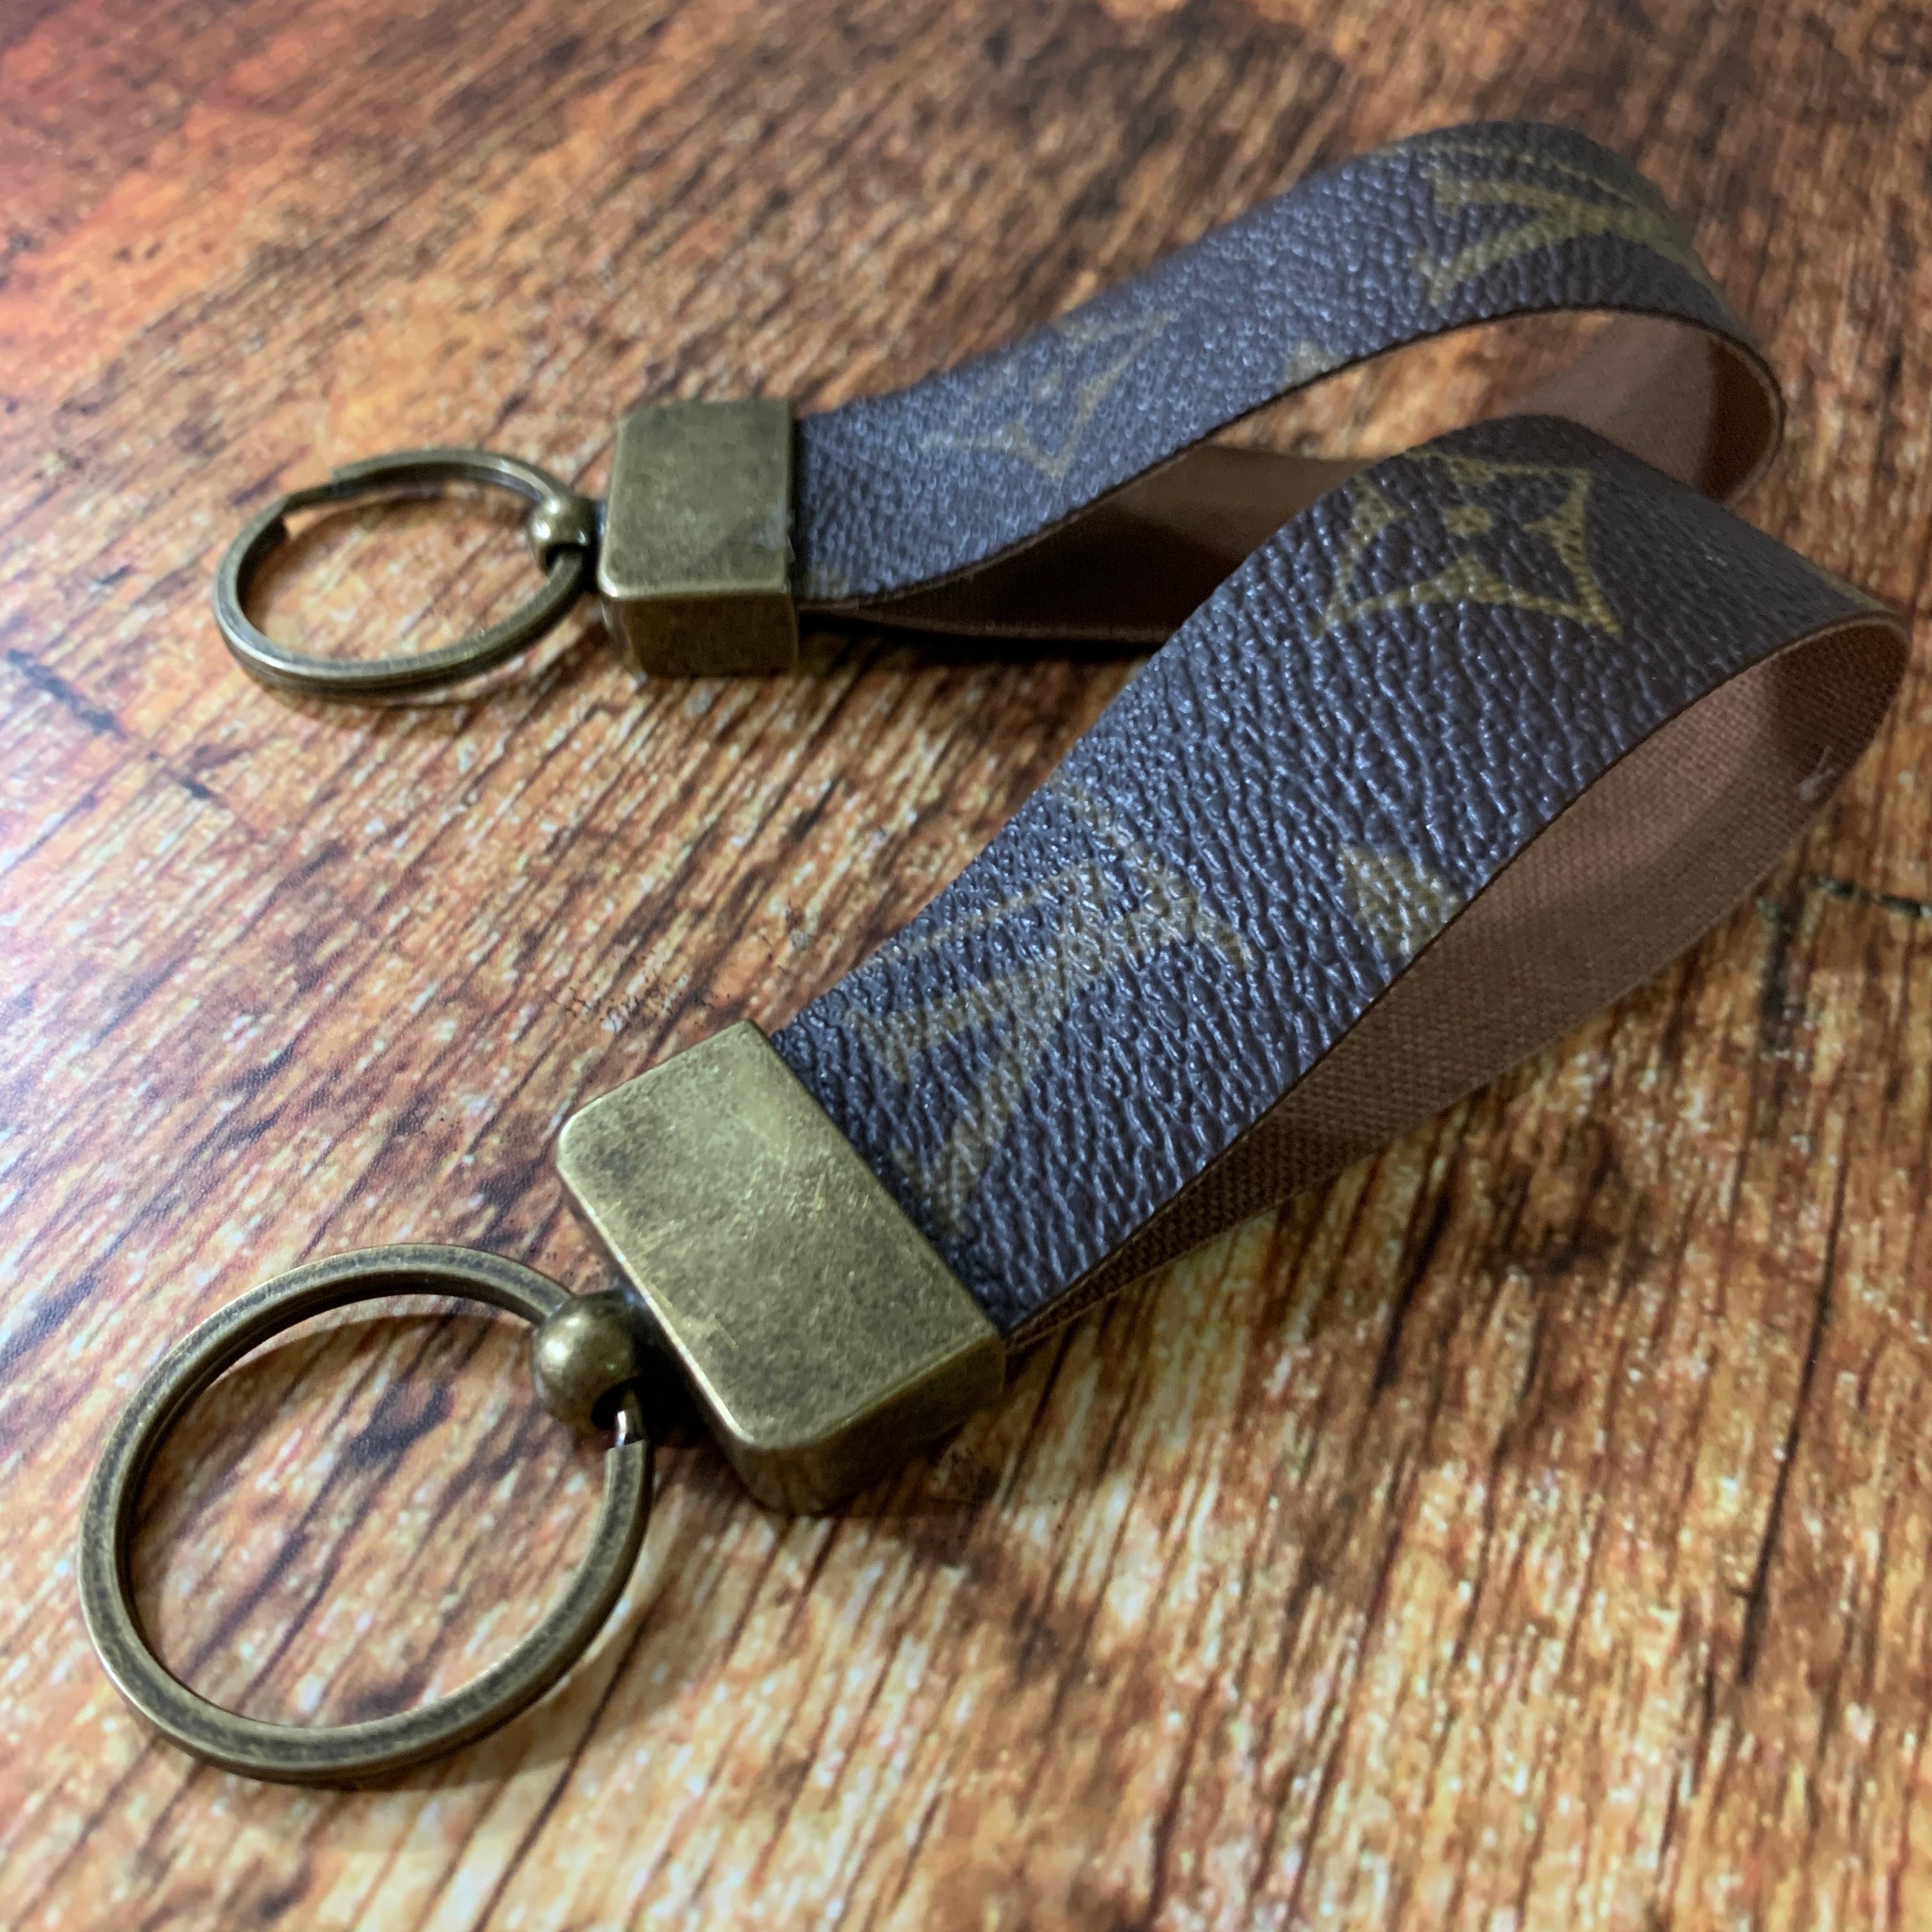 Upcycled Louis Vuitton Leather Key Chain V3 – N.Kluger Designs